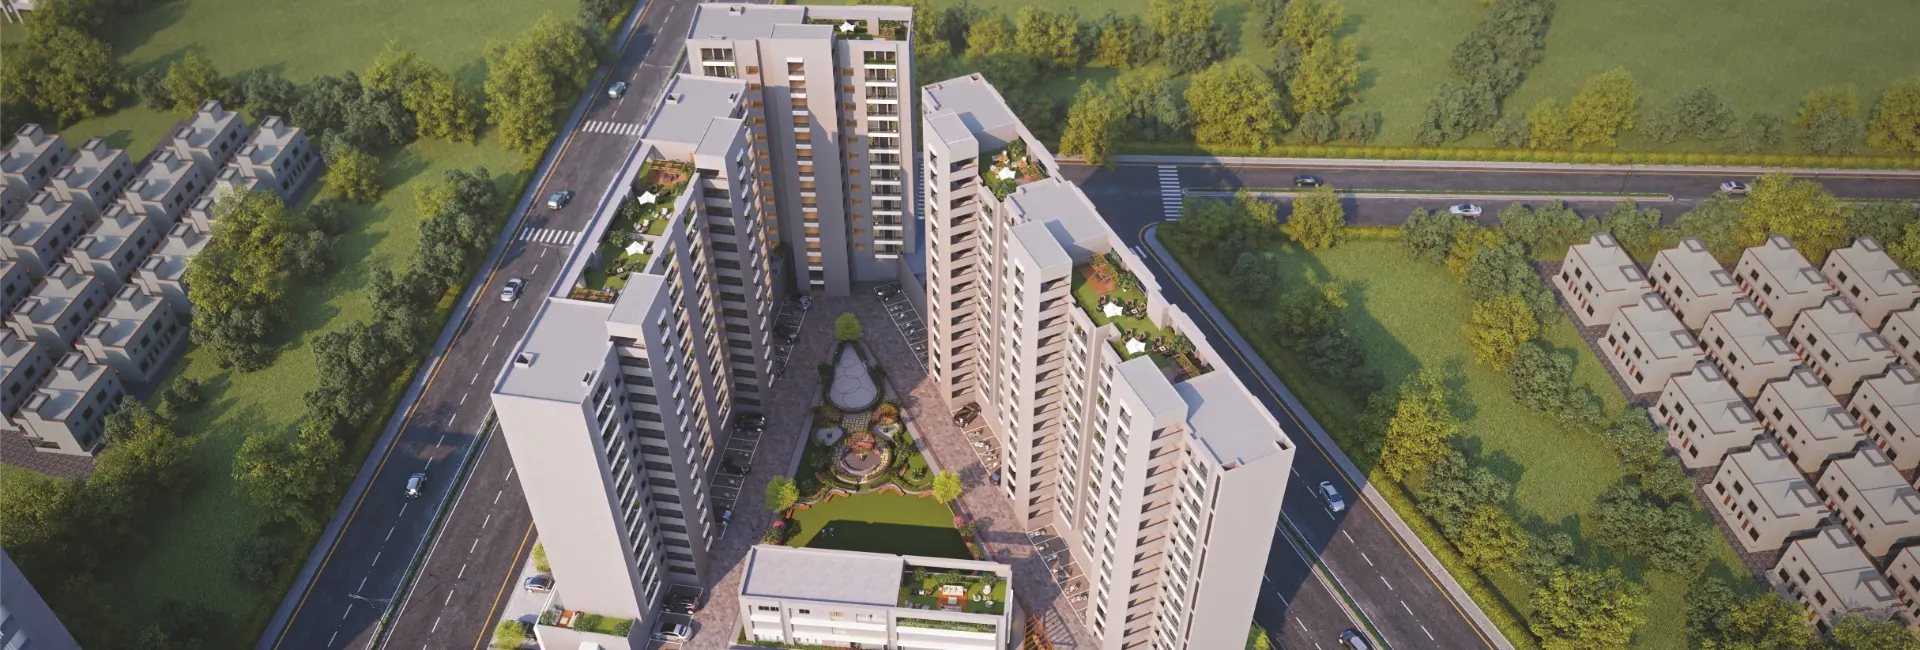 Shree Siddheshwar Hollyhock Residential and Commercial Spaces